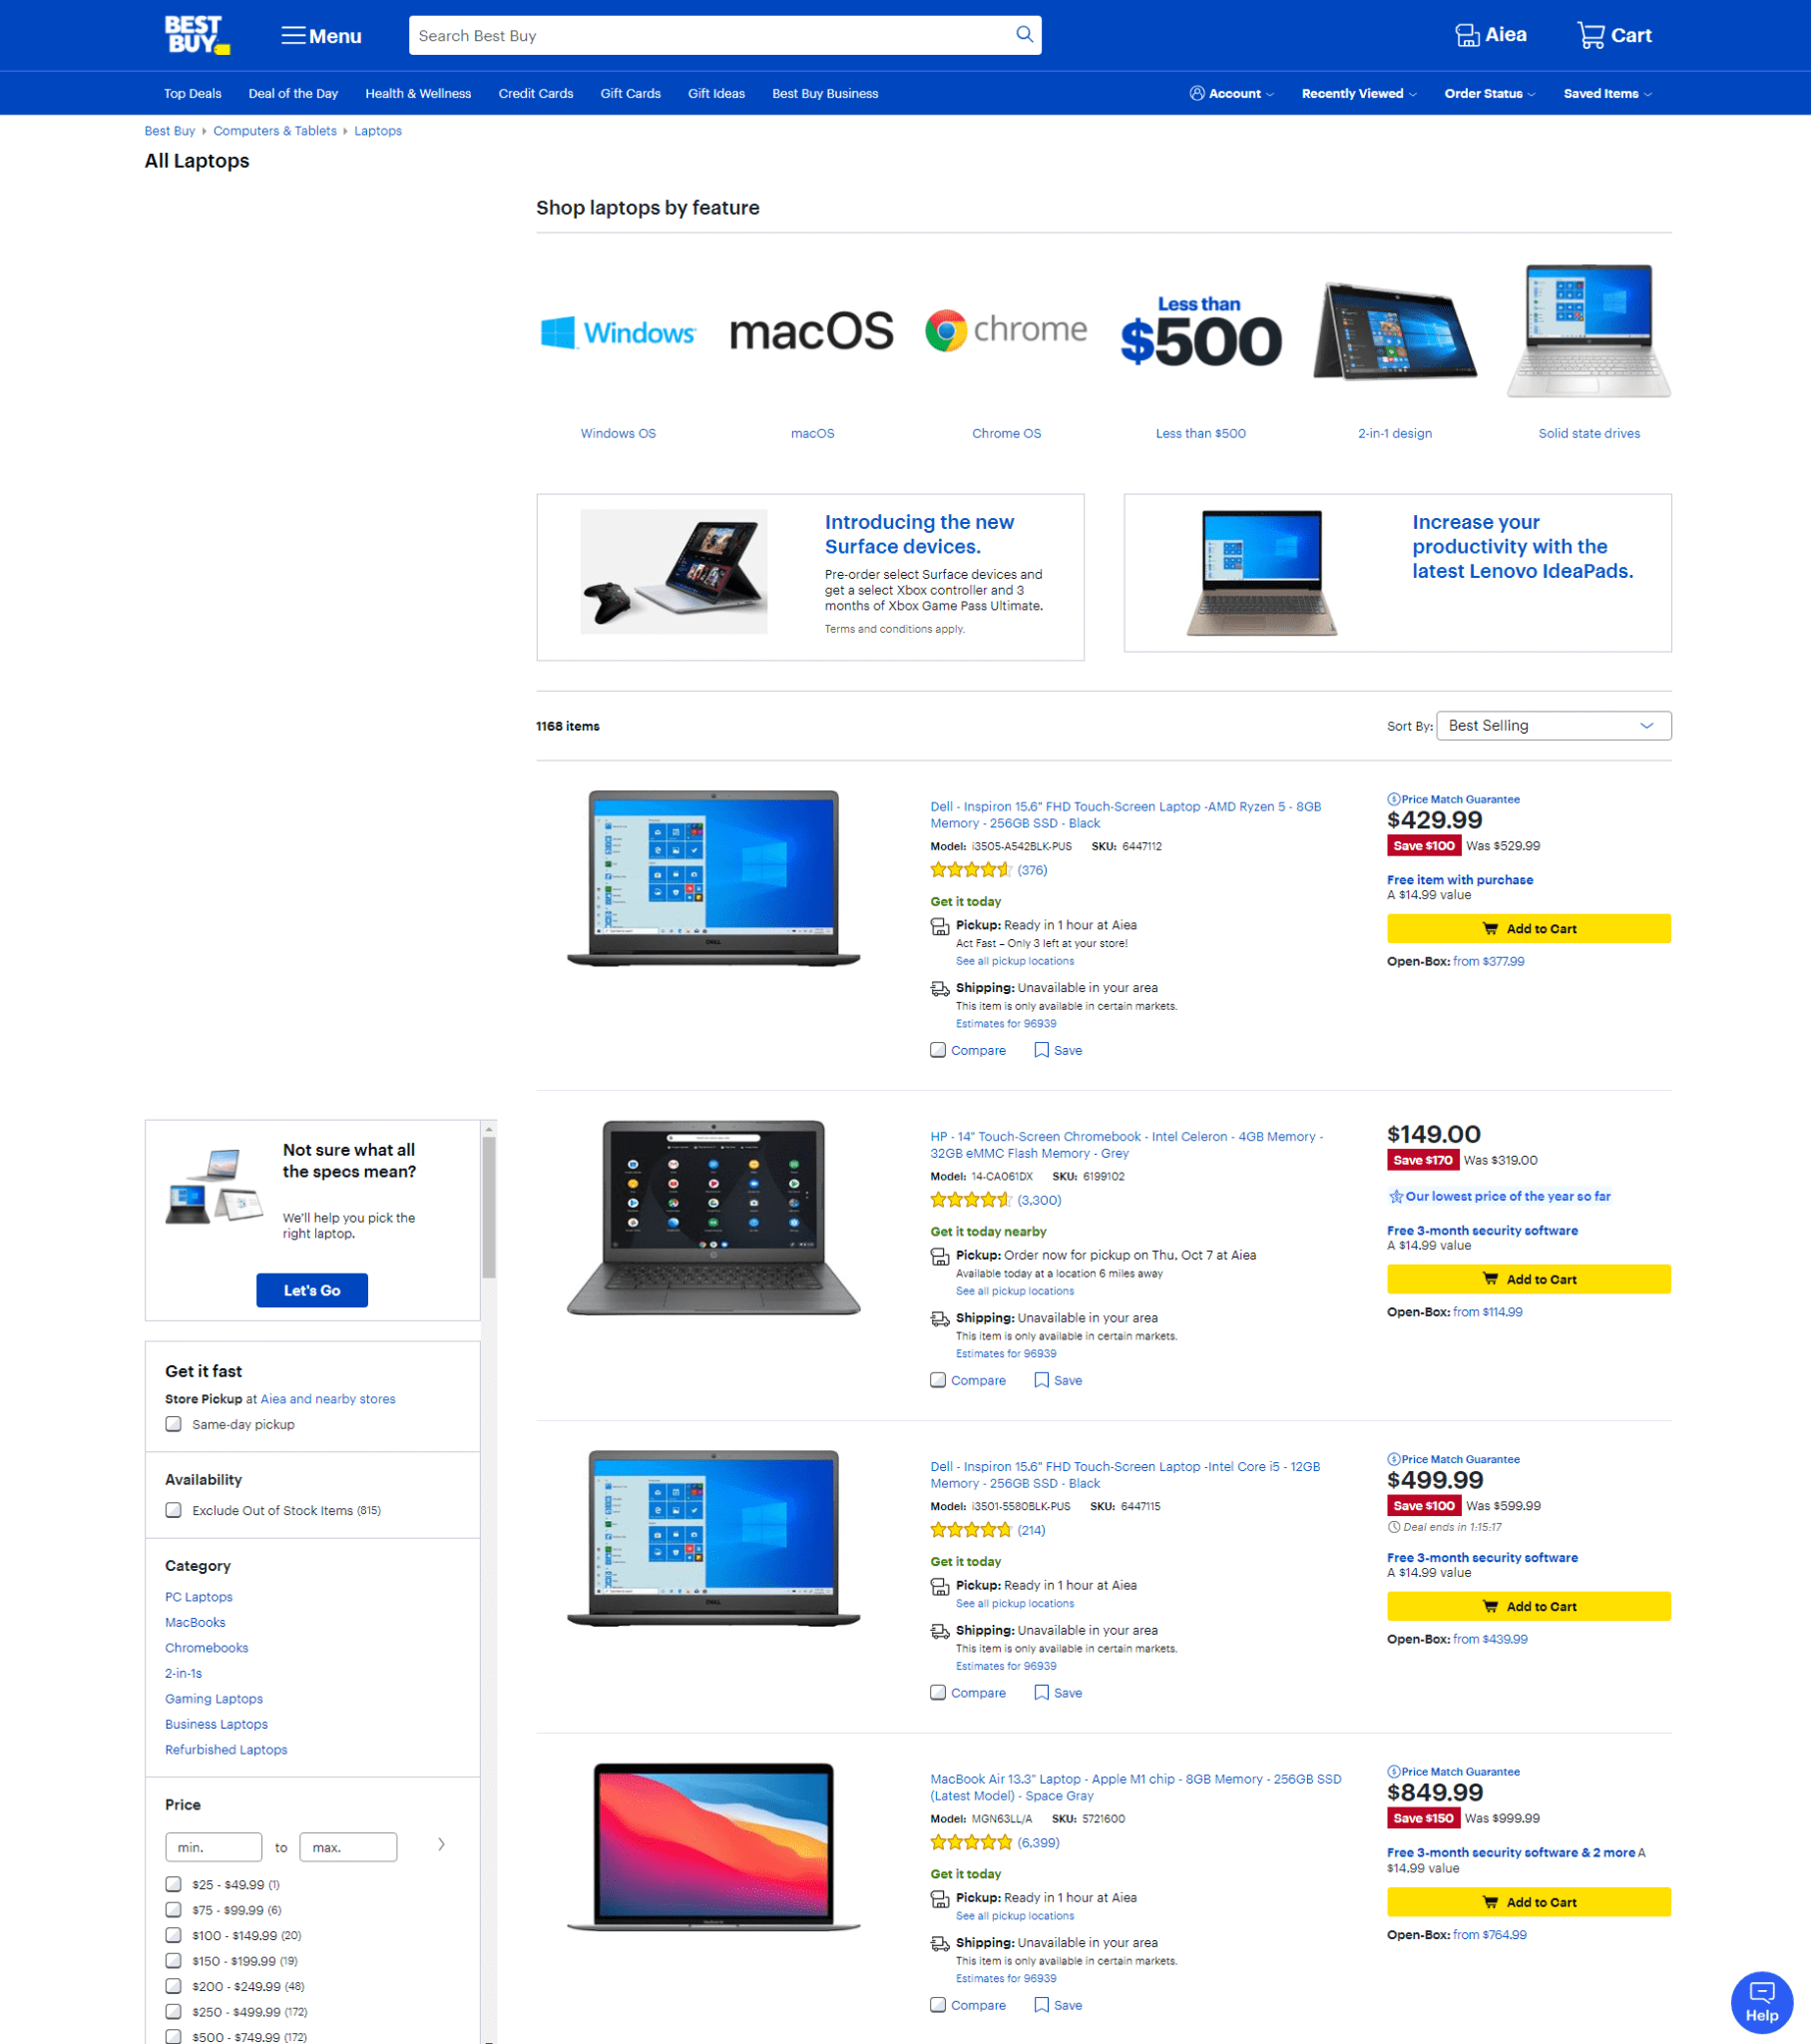 Best Buy showcasing its laptop collection in List view